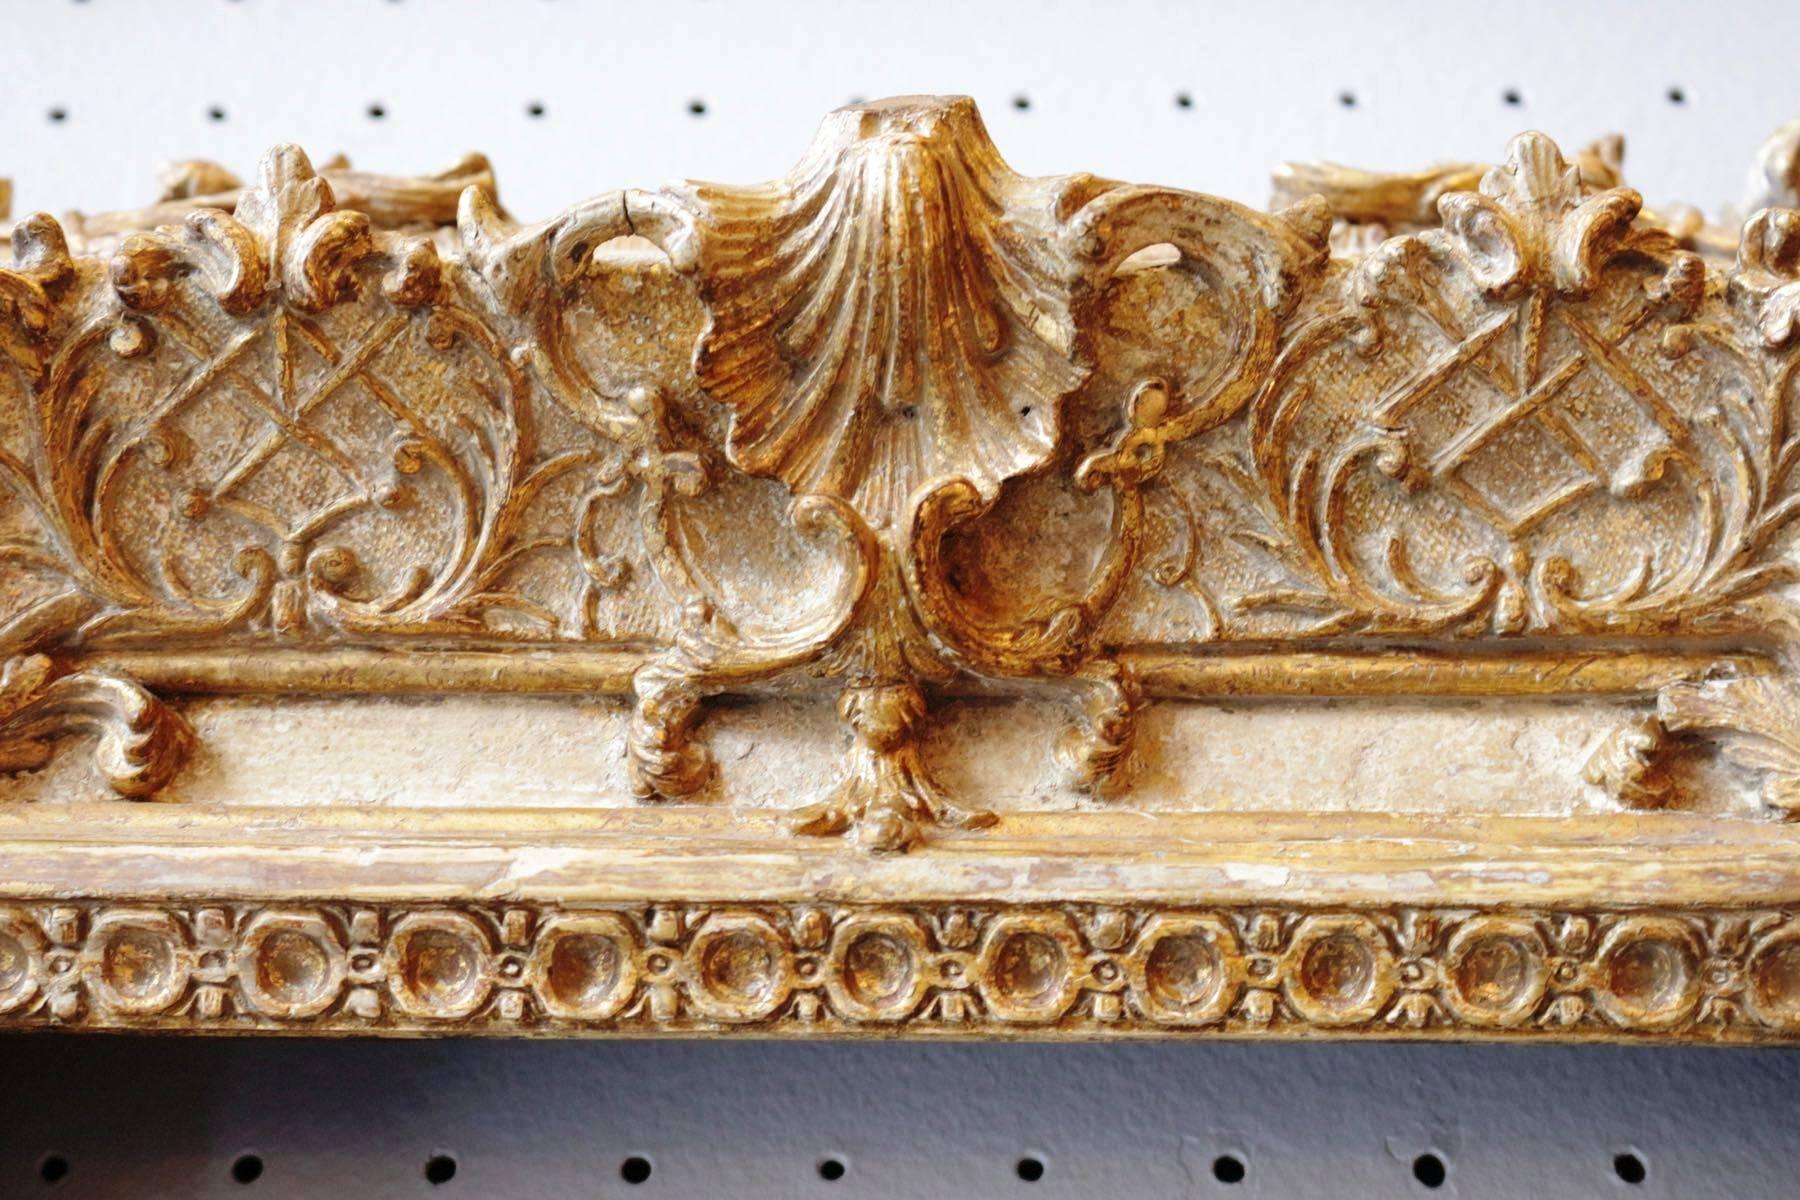 Exceptional Royal Quality French Regence frame mounted as mirror, France, 1720s
carved giltwood
the most extraordinary carving and gilding ever seen on a frame.
Illustrated in the catalogue of the exhibition 